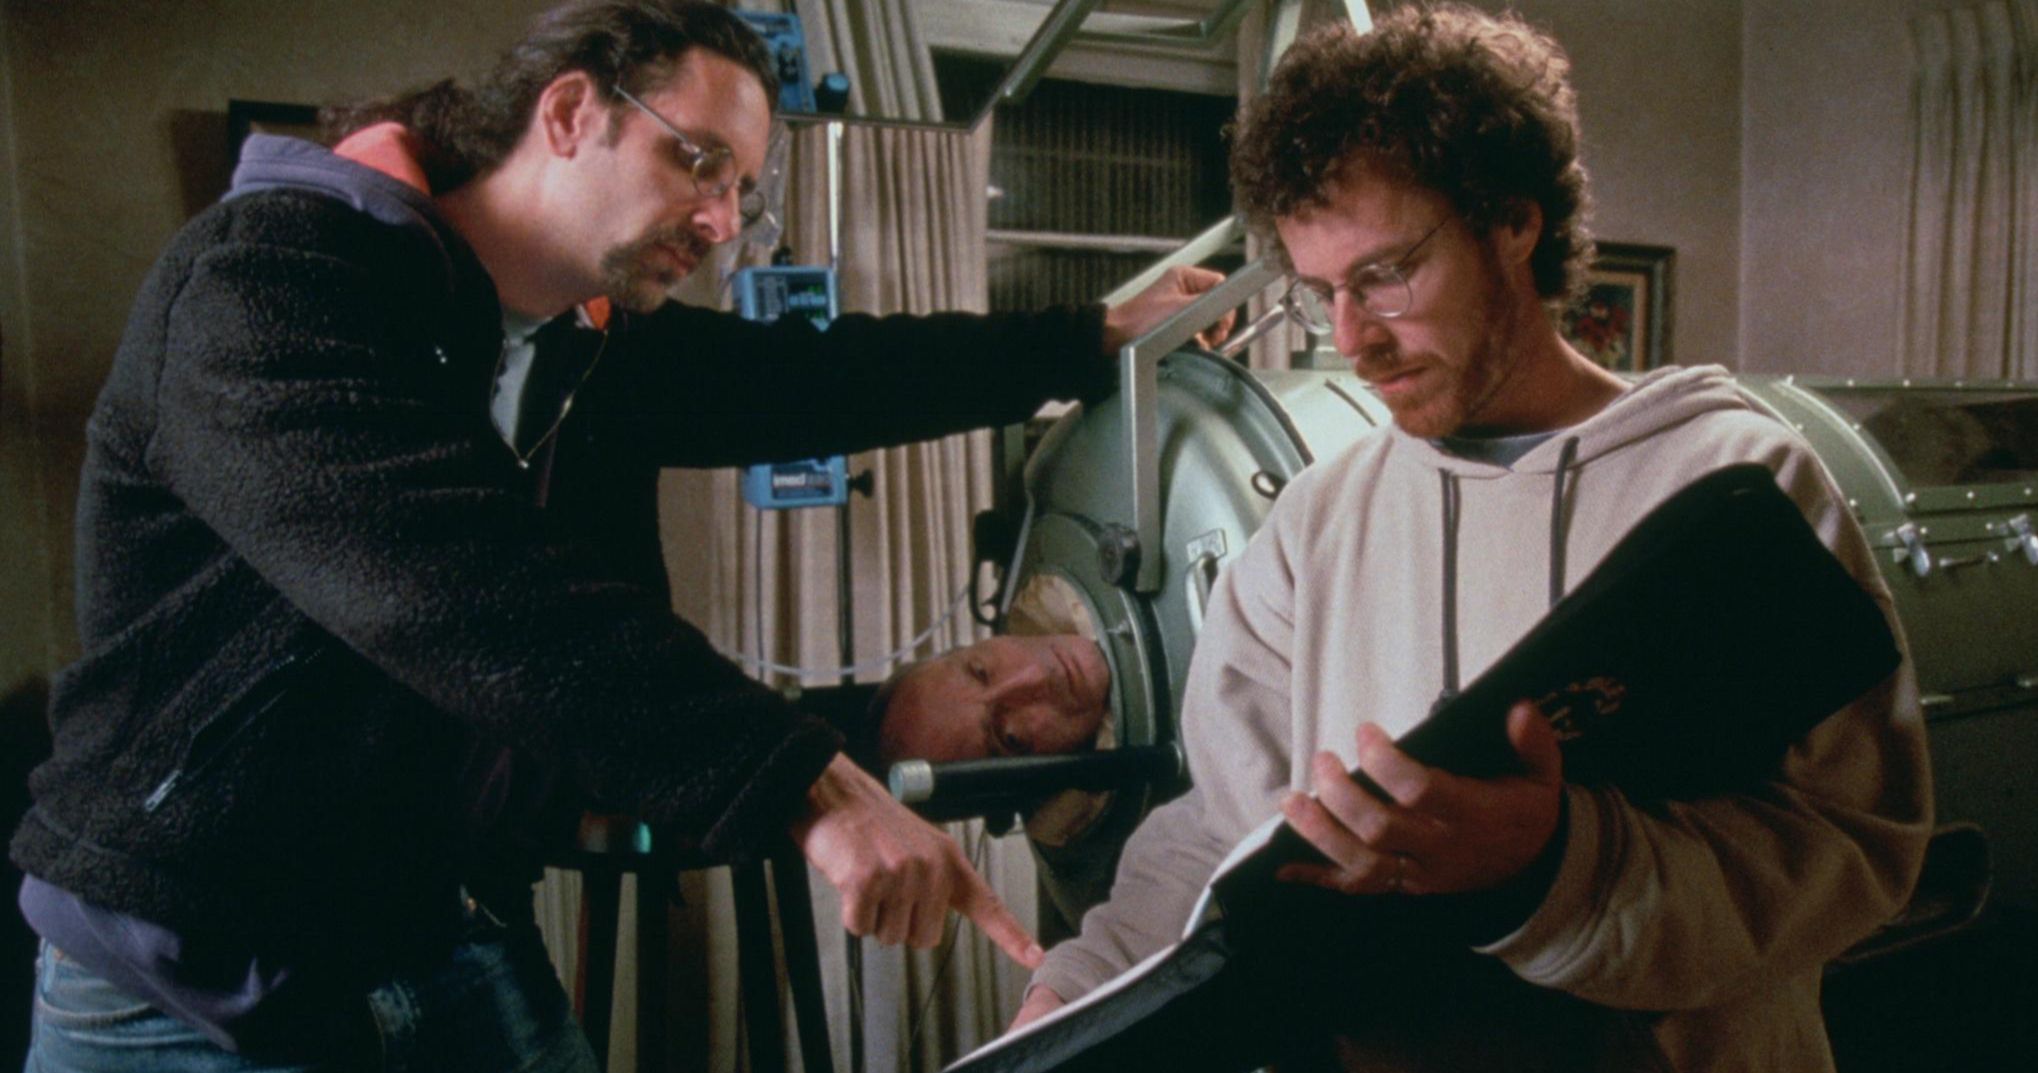 Are the Coen Brothers Done Making Movies Together?